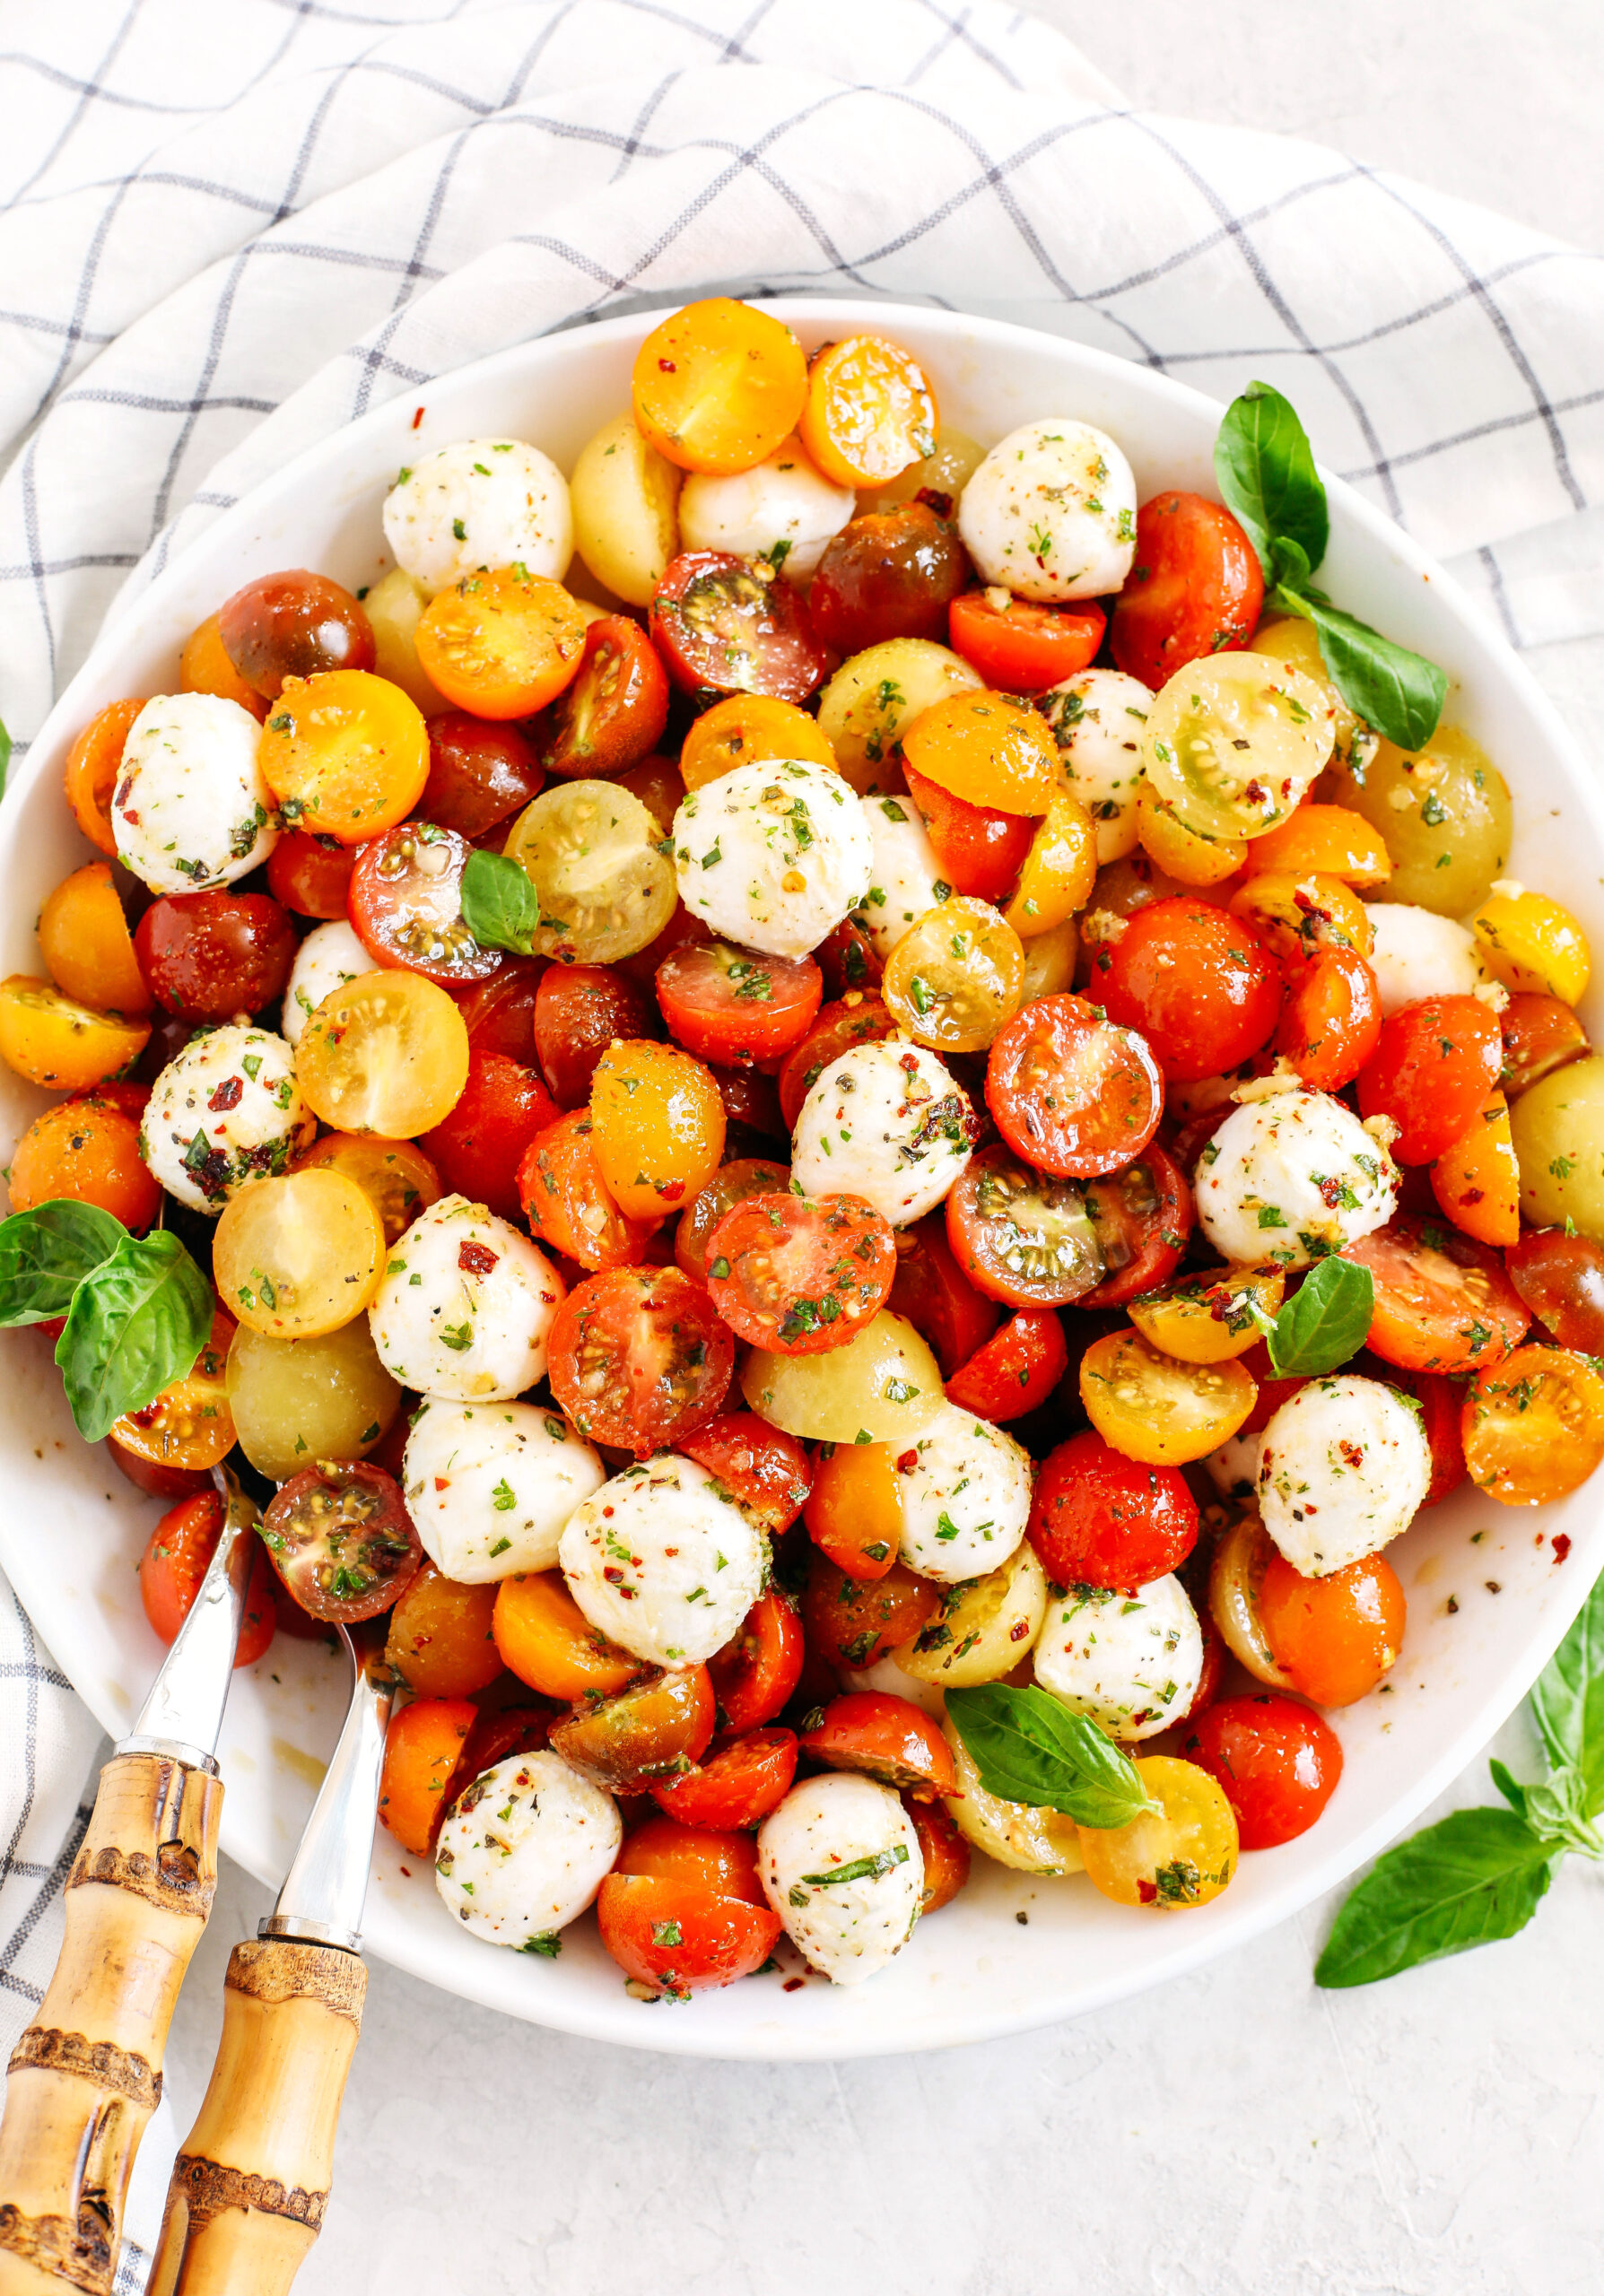 This Summer Caprese Salad is loaded with juicy tomatoes and creamy balls of mozzarella cheese all marinated in a delicious combination of olive oil, balsamic vinegar, garlic and fresh herbs!